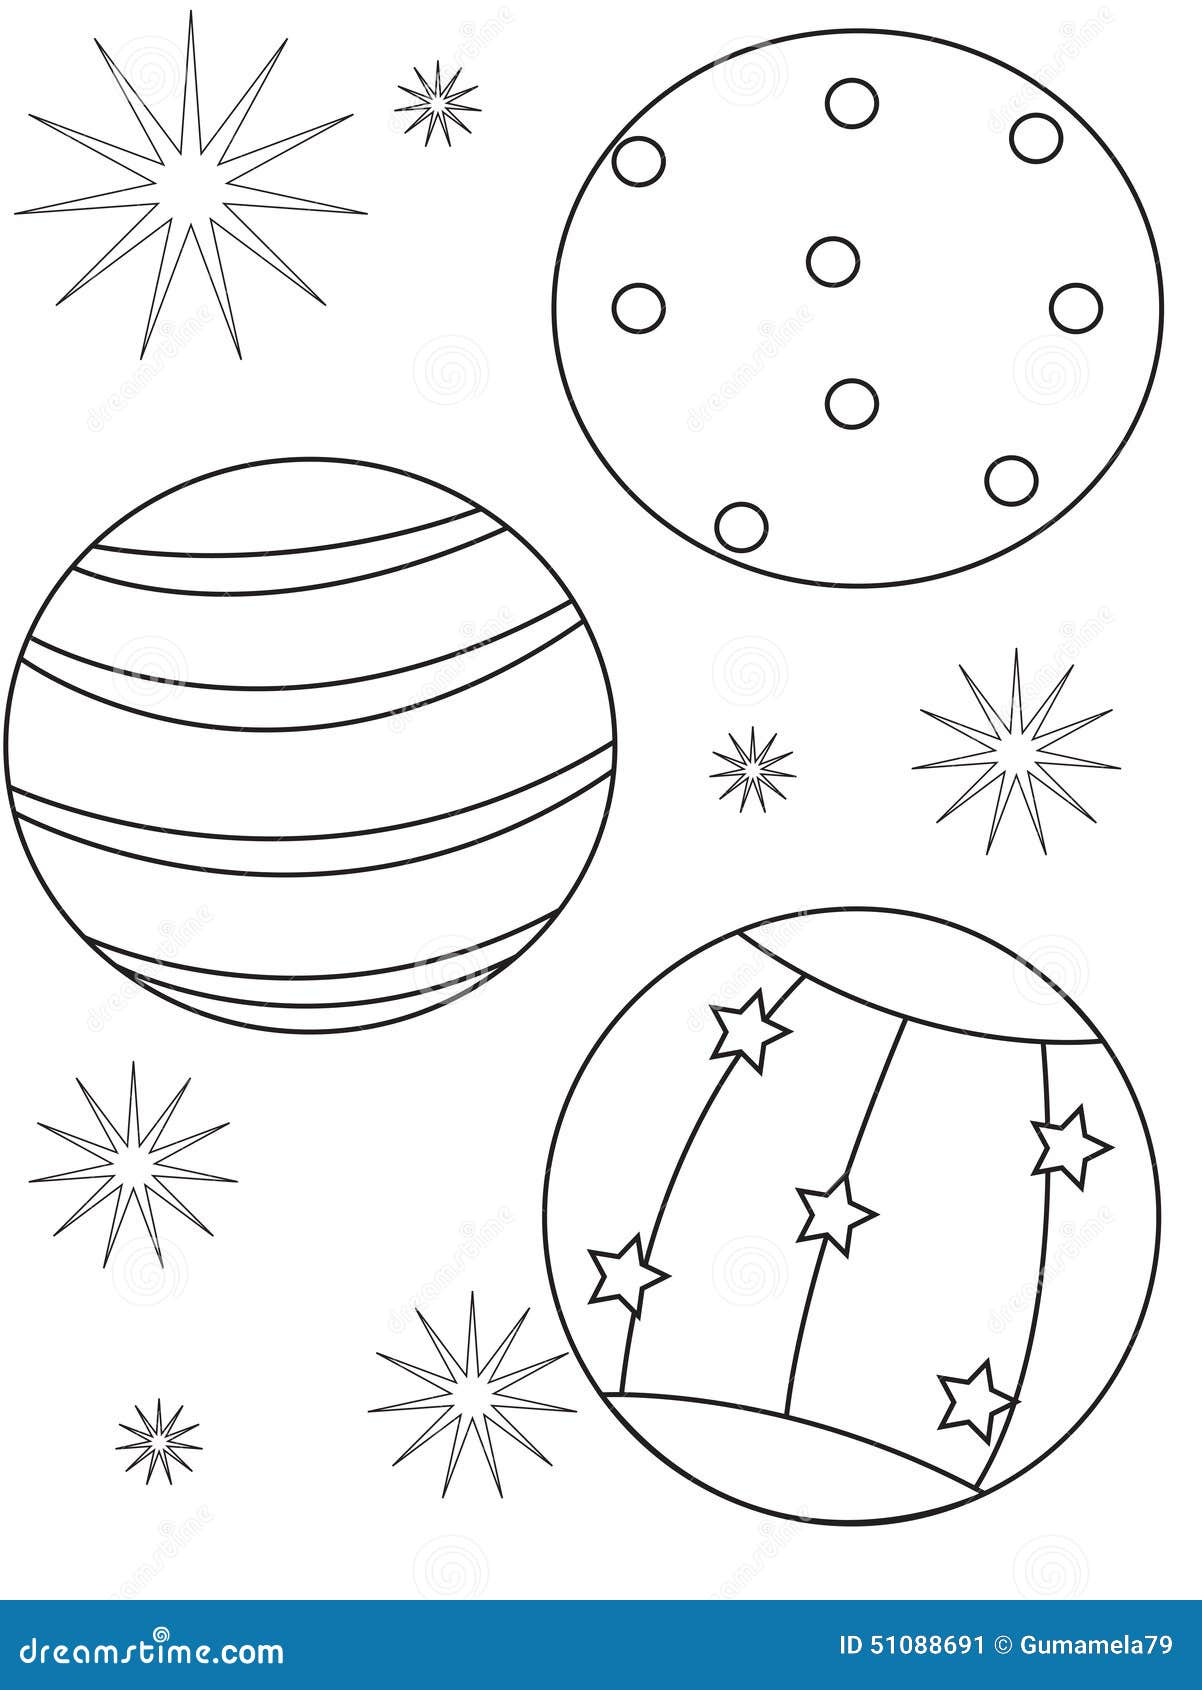 Beach ball coloring page Royalty Free Illustration